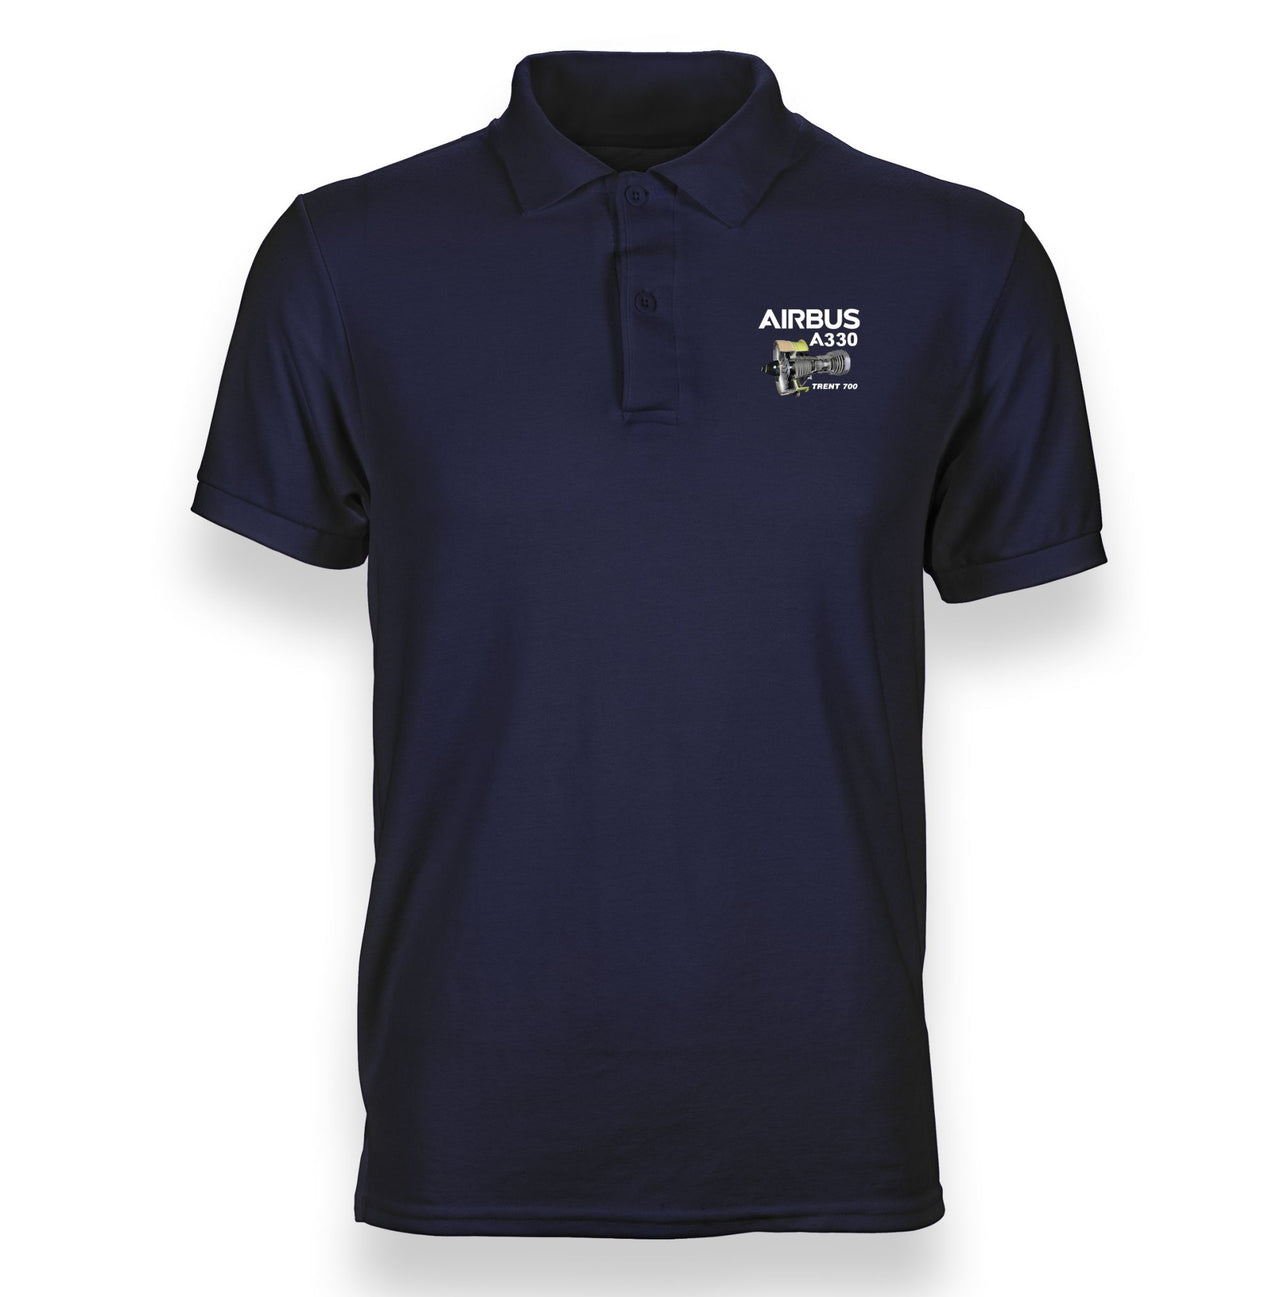 Airbus A330 & Trent 700 Engine Designed "WOMEN" Polo T-Shirts